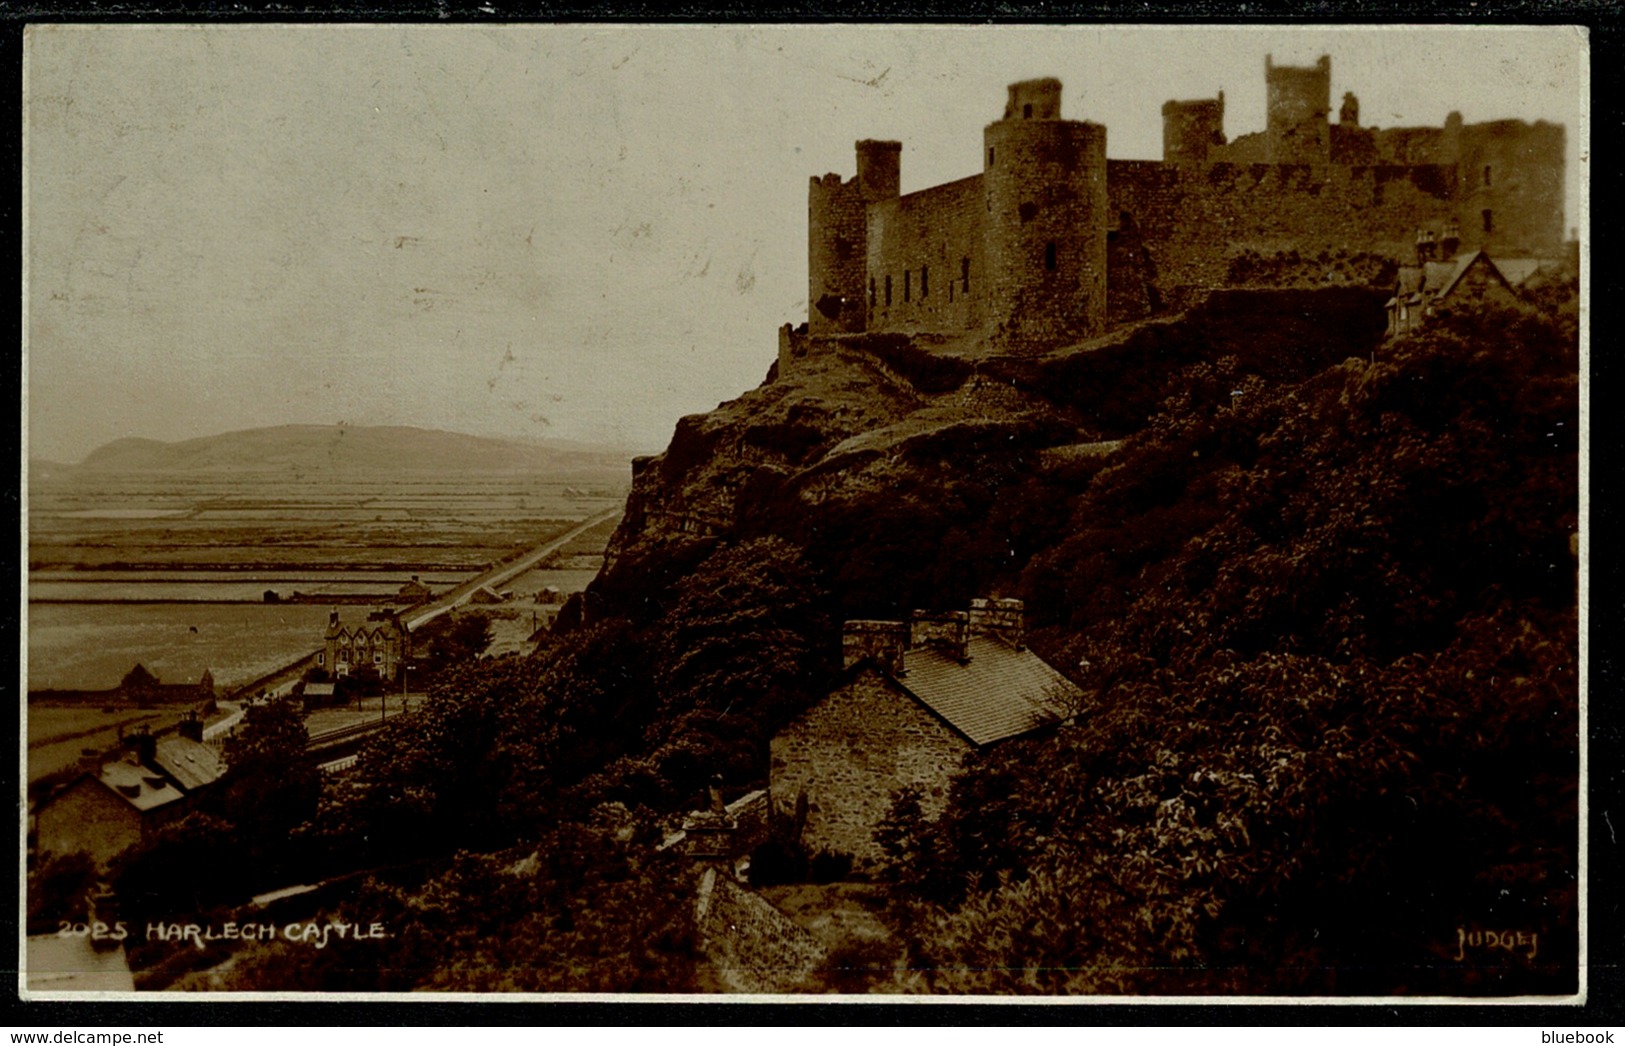 Ref 1272 - 1936 Judges Real Photo Postcard - Harlech Castle - Merionethshire Wales - Merionethshire